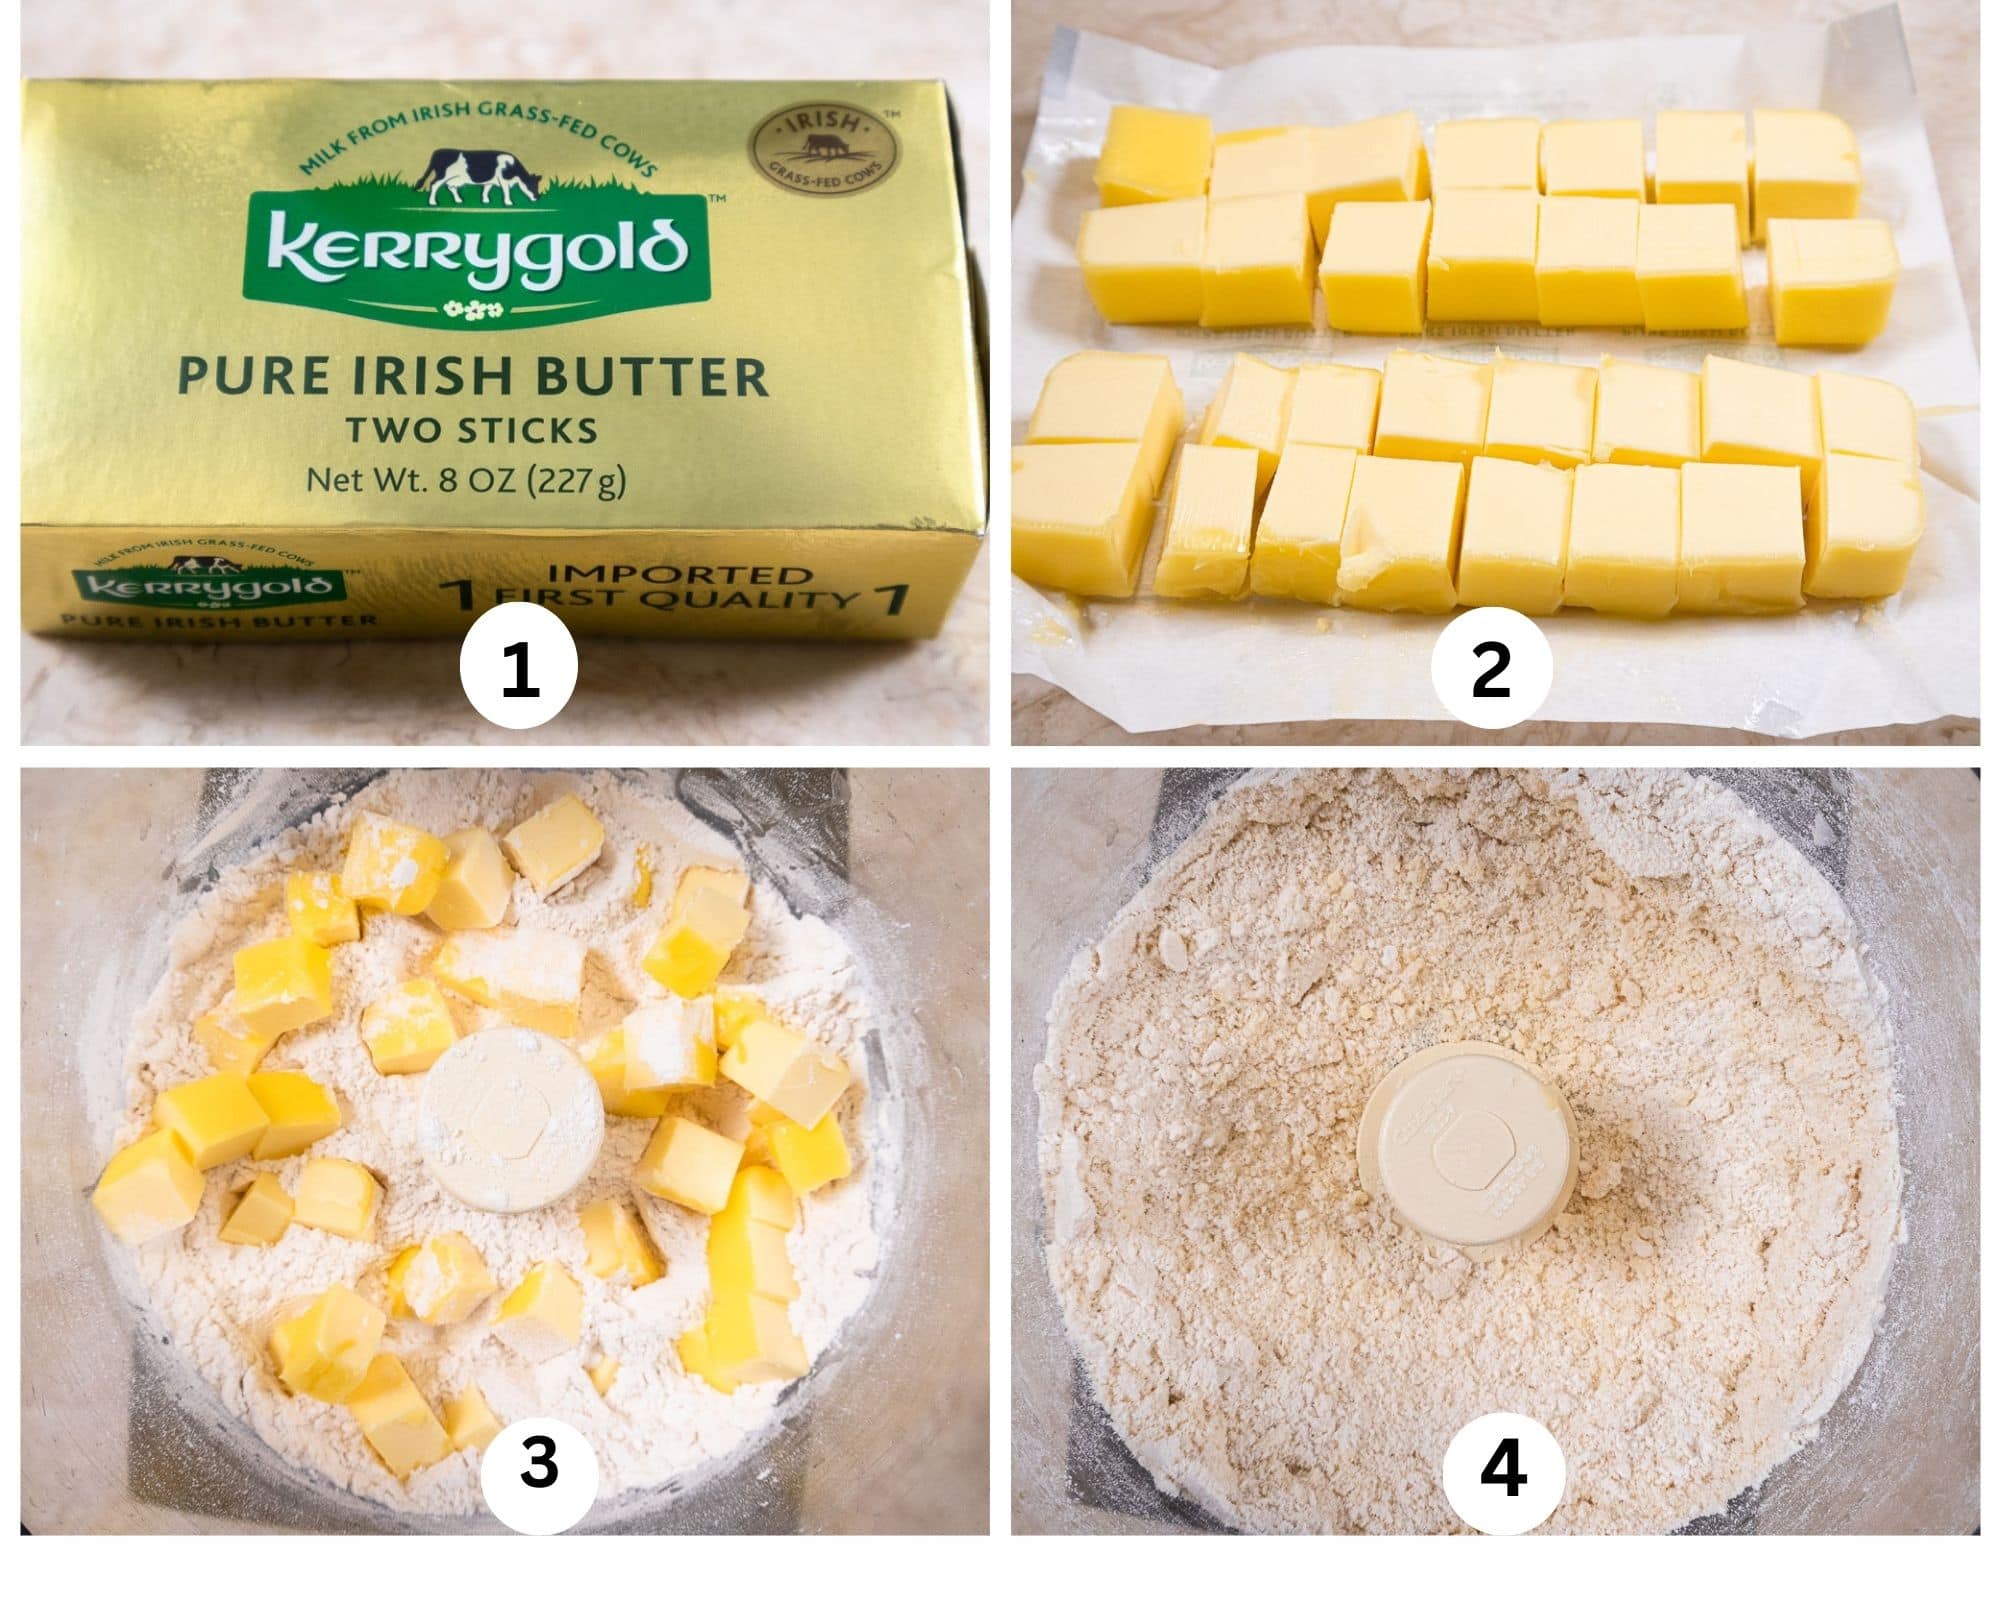 Sable Breton collage 1 includes kerrygold box, butter cut in pieces, butter over dry ingredients, butter processed in.